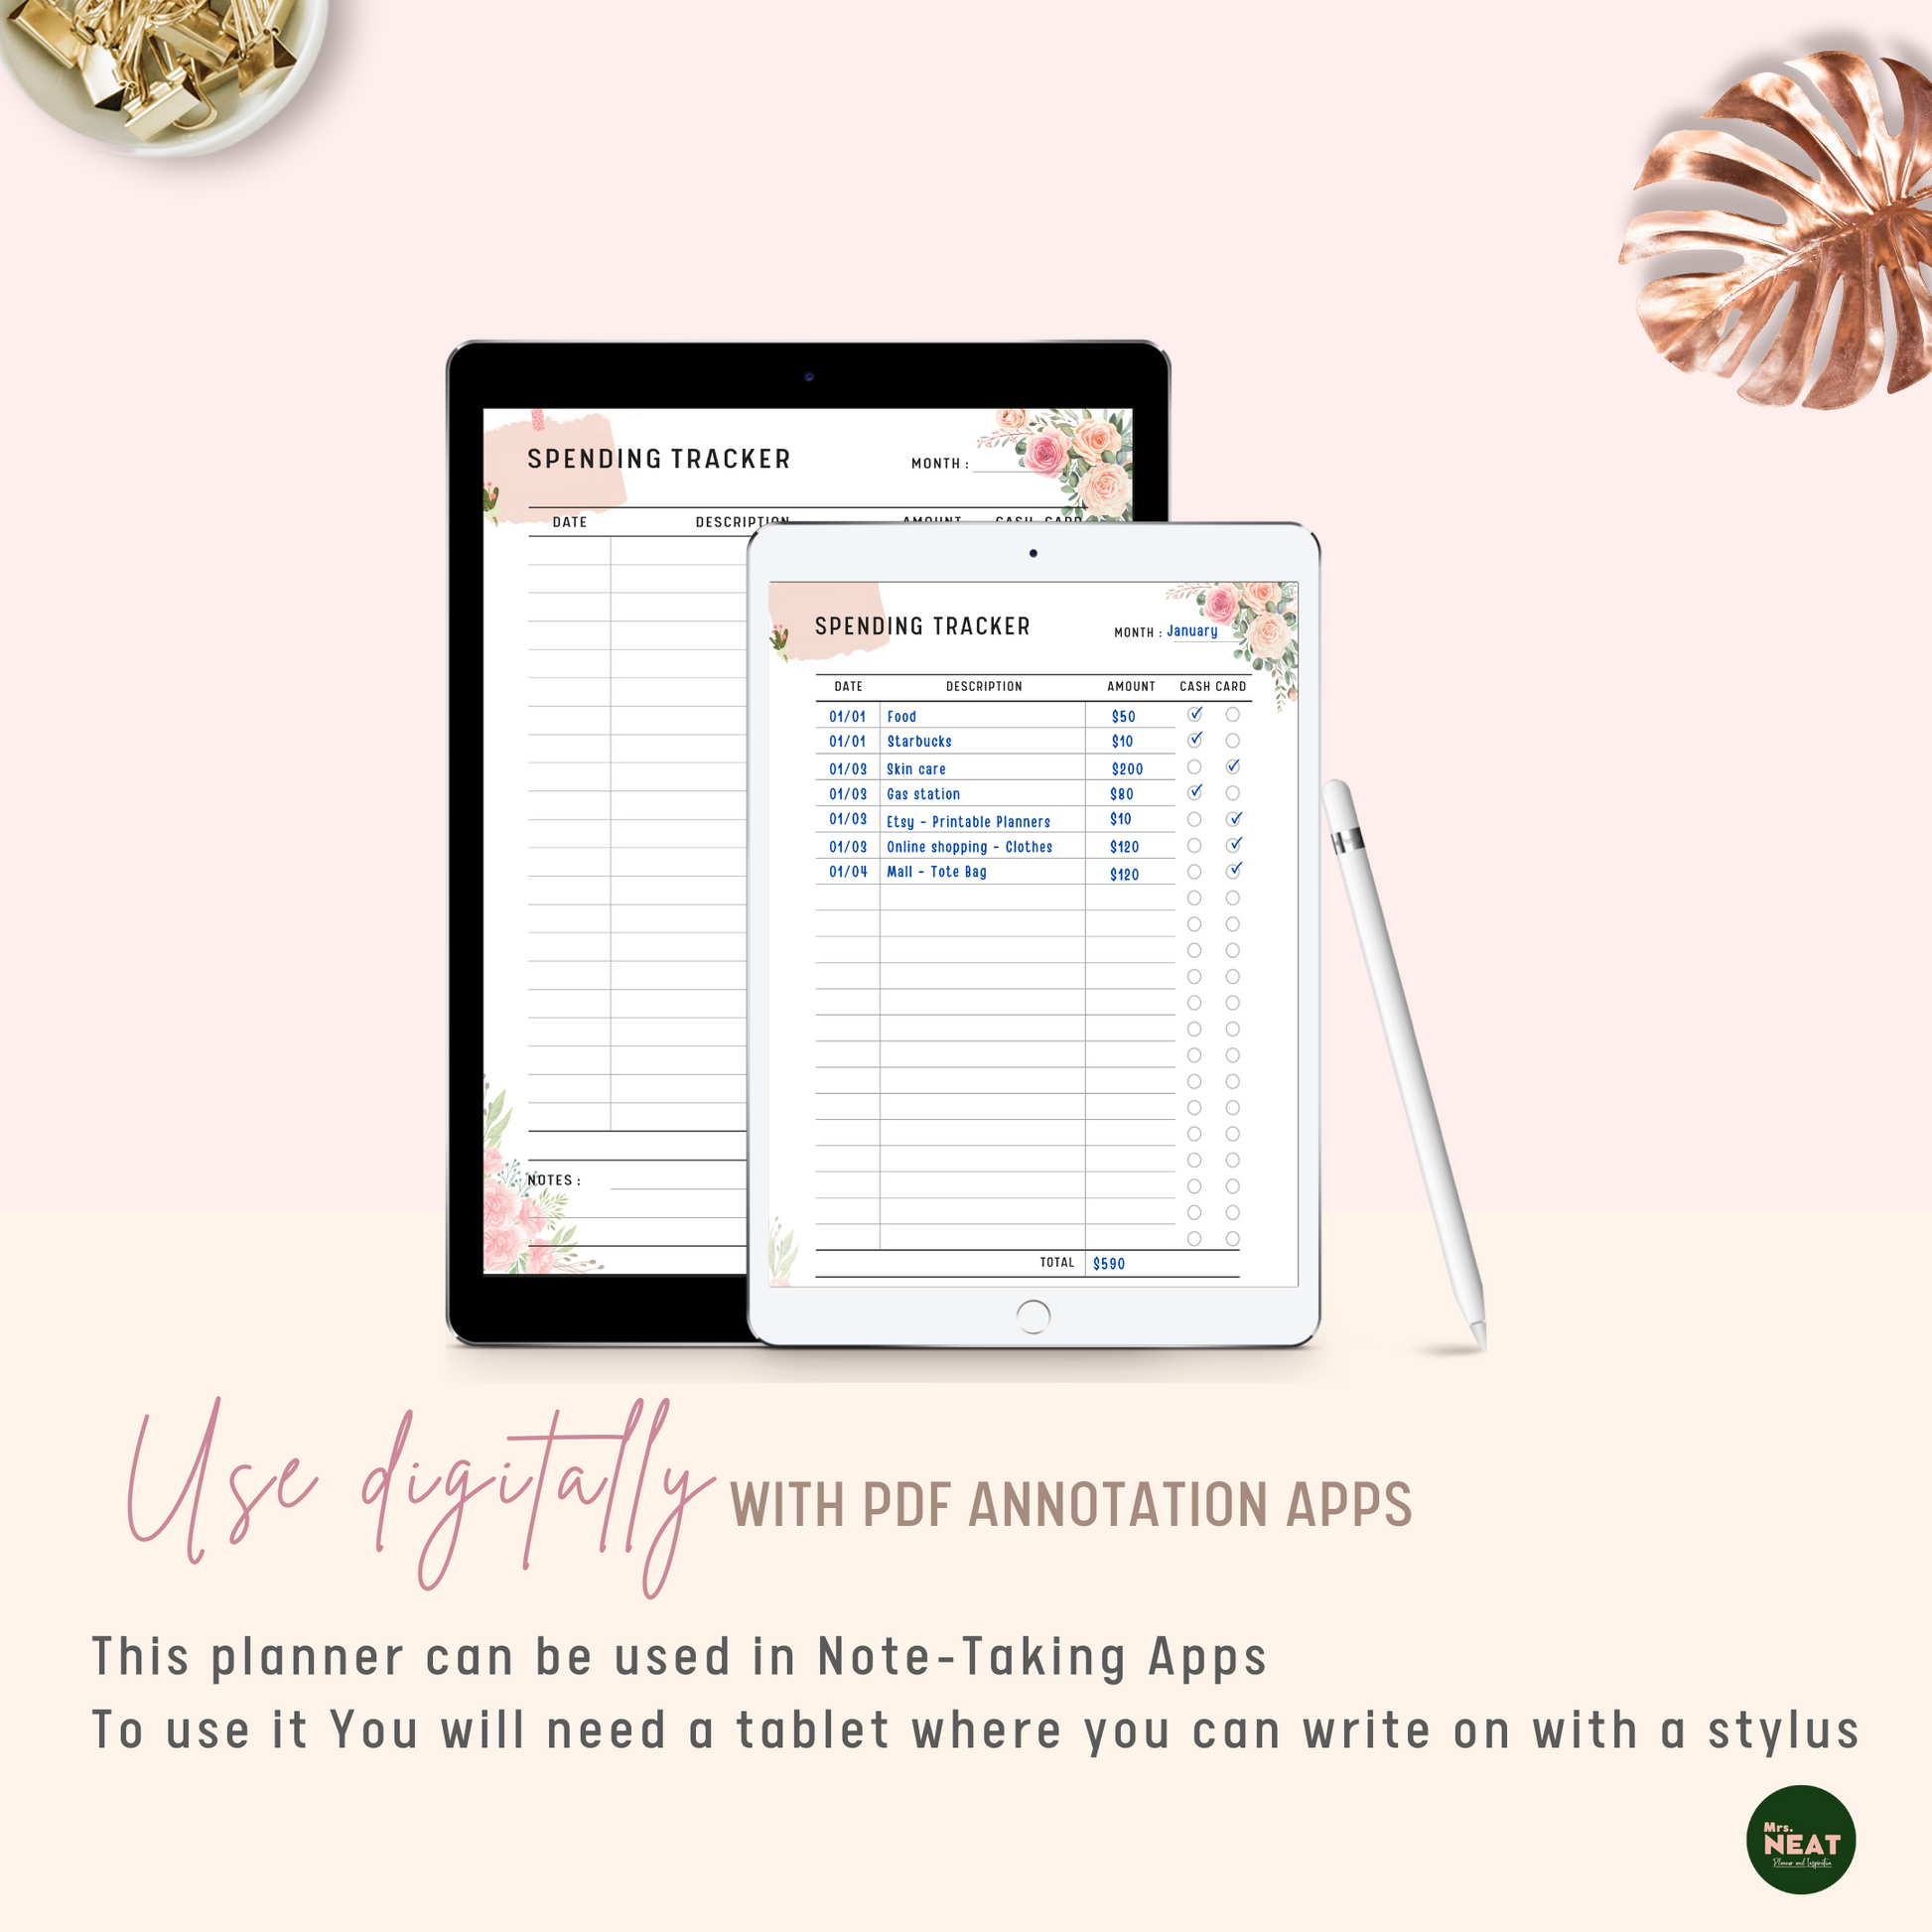 Floral Spending Tracker Planner used Digitally with Tablet and Stylus